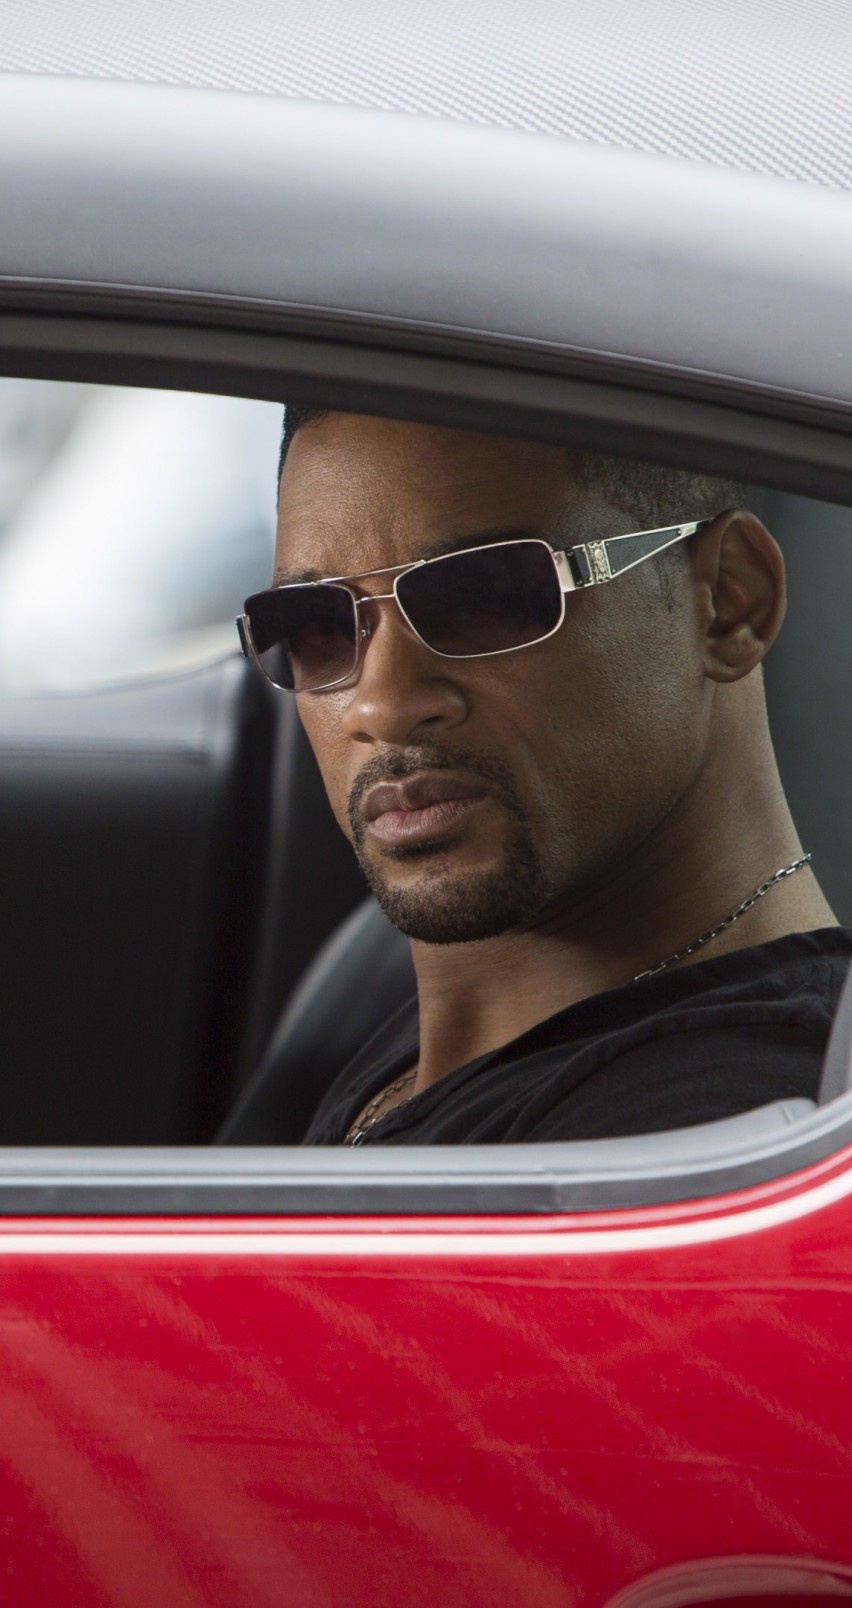 Will Smith at the shooting of "Focus" Wallpaper for Apple iPhone 6 / 6s